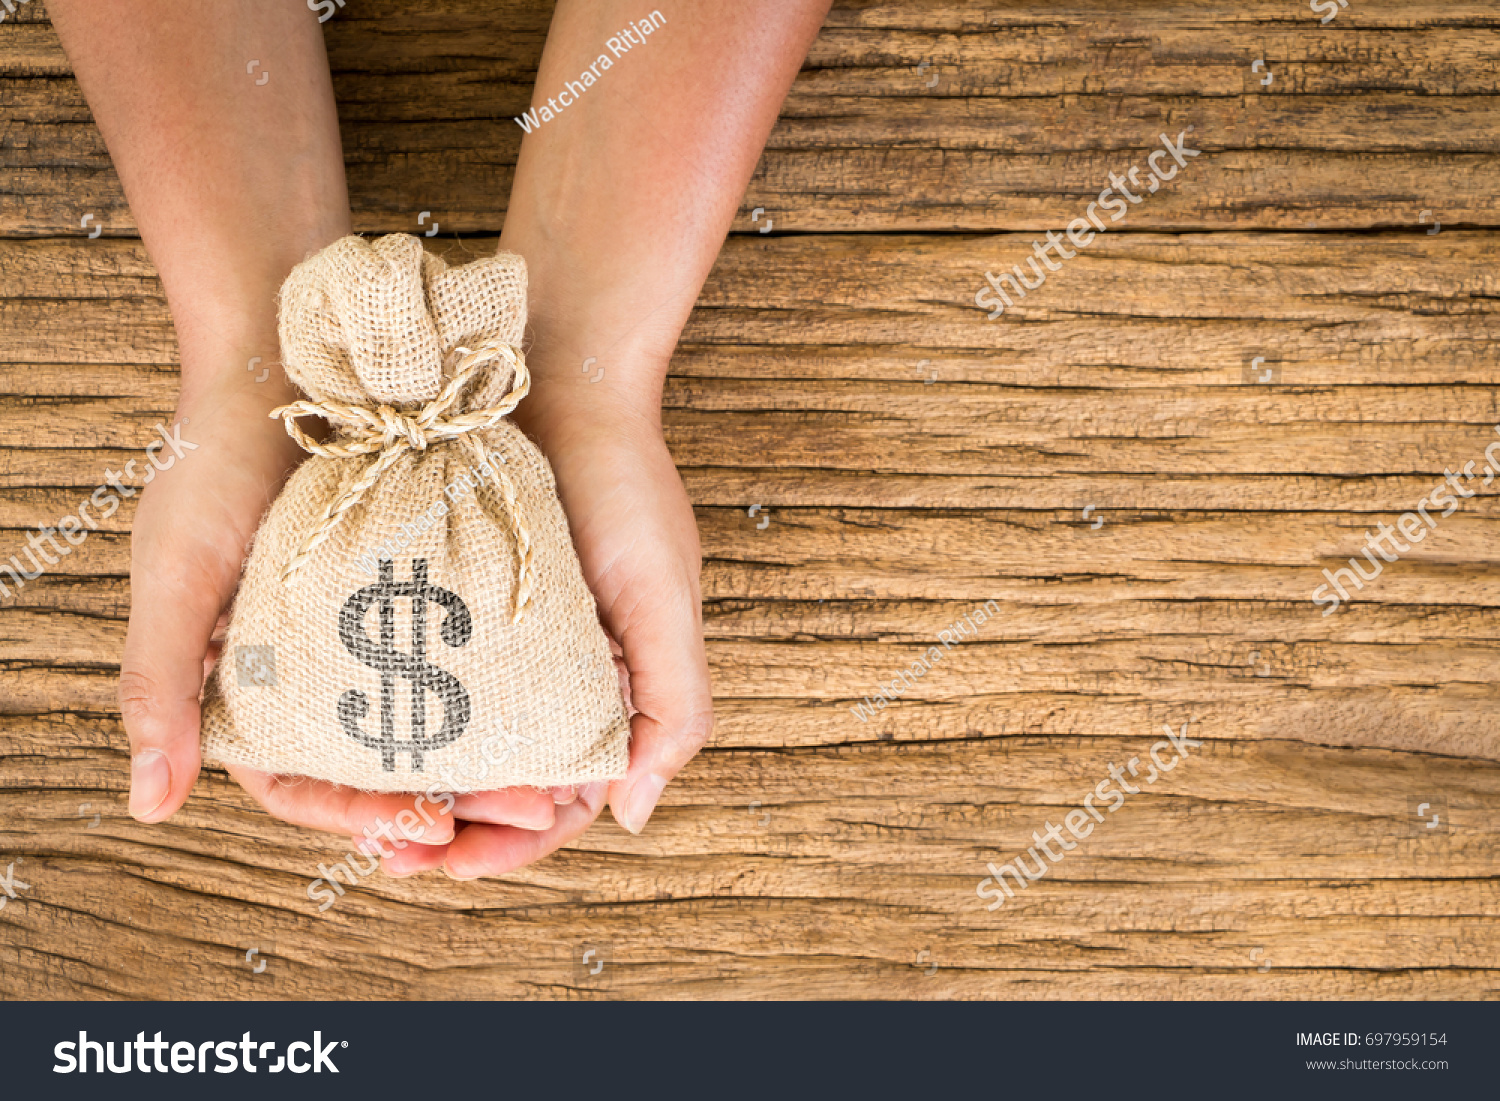 Women hold a money bag on the vintage wood background, a loan or saving money for future investment concept. #697959154